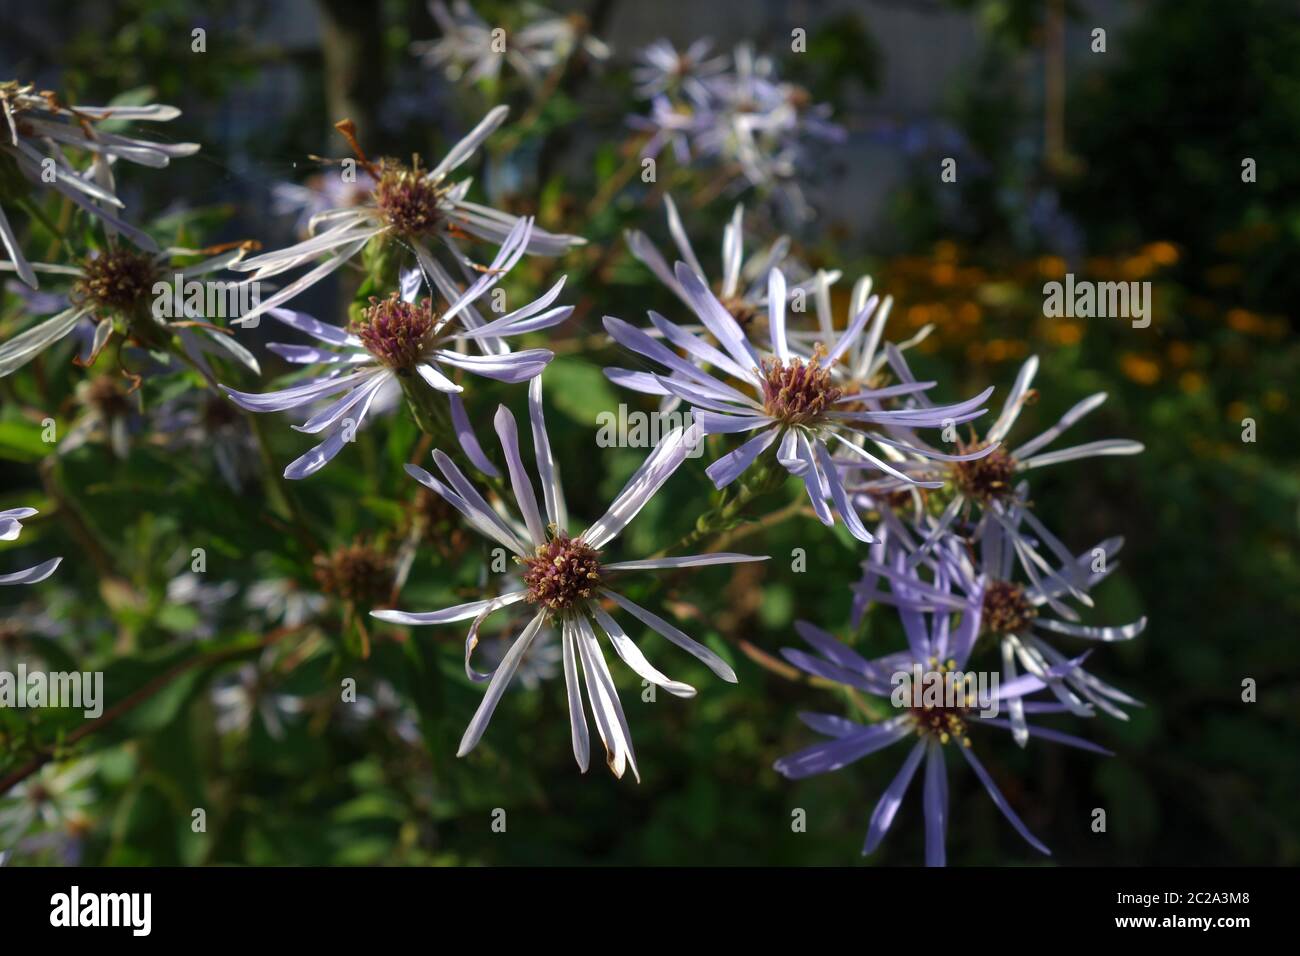 Aster amellus Stock Photo